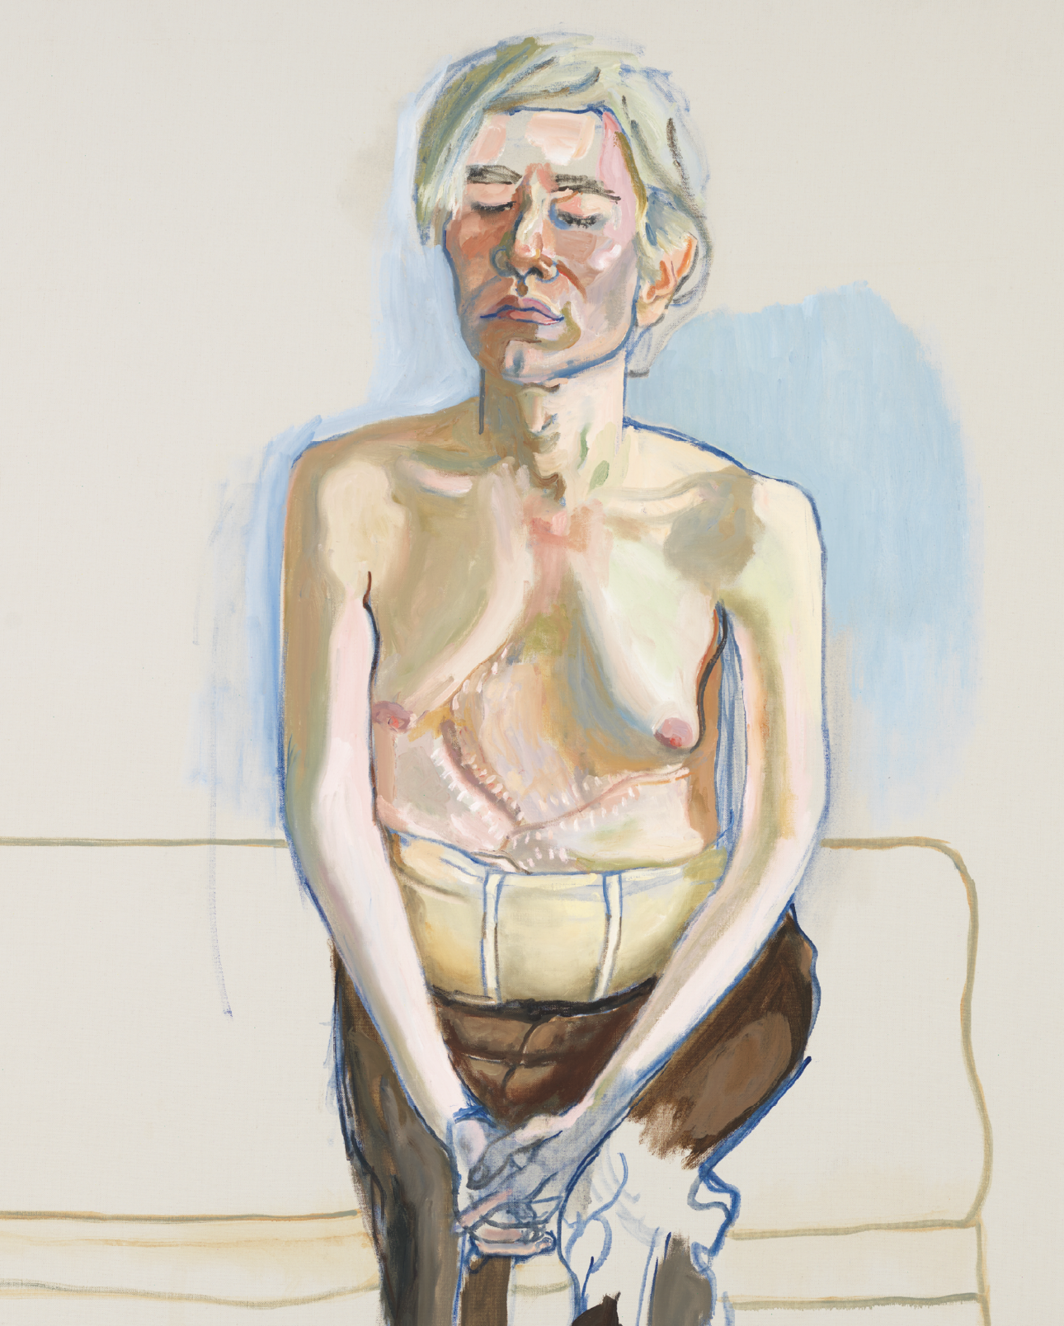 Alice Neel, Andy Warhol (detail), 1970, oil and acrylic on linen, 60 x 40".